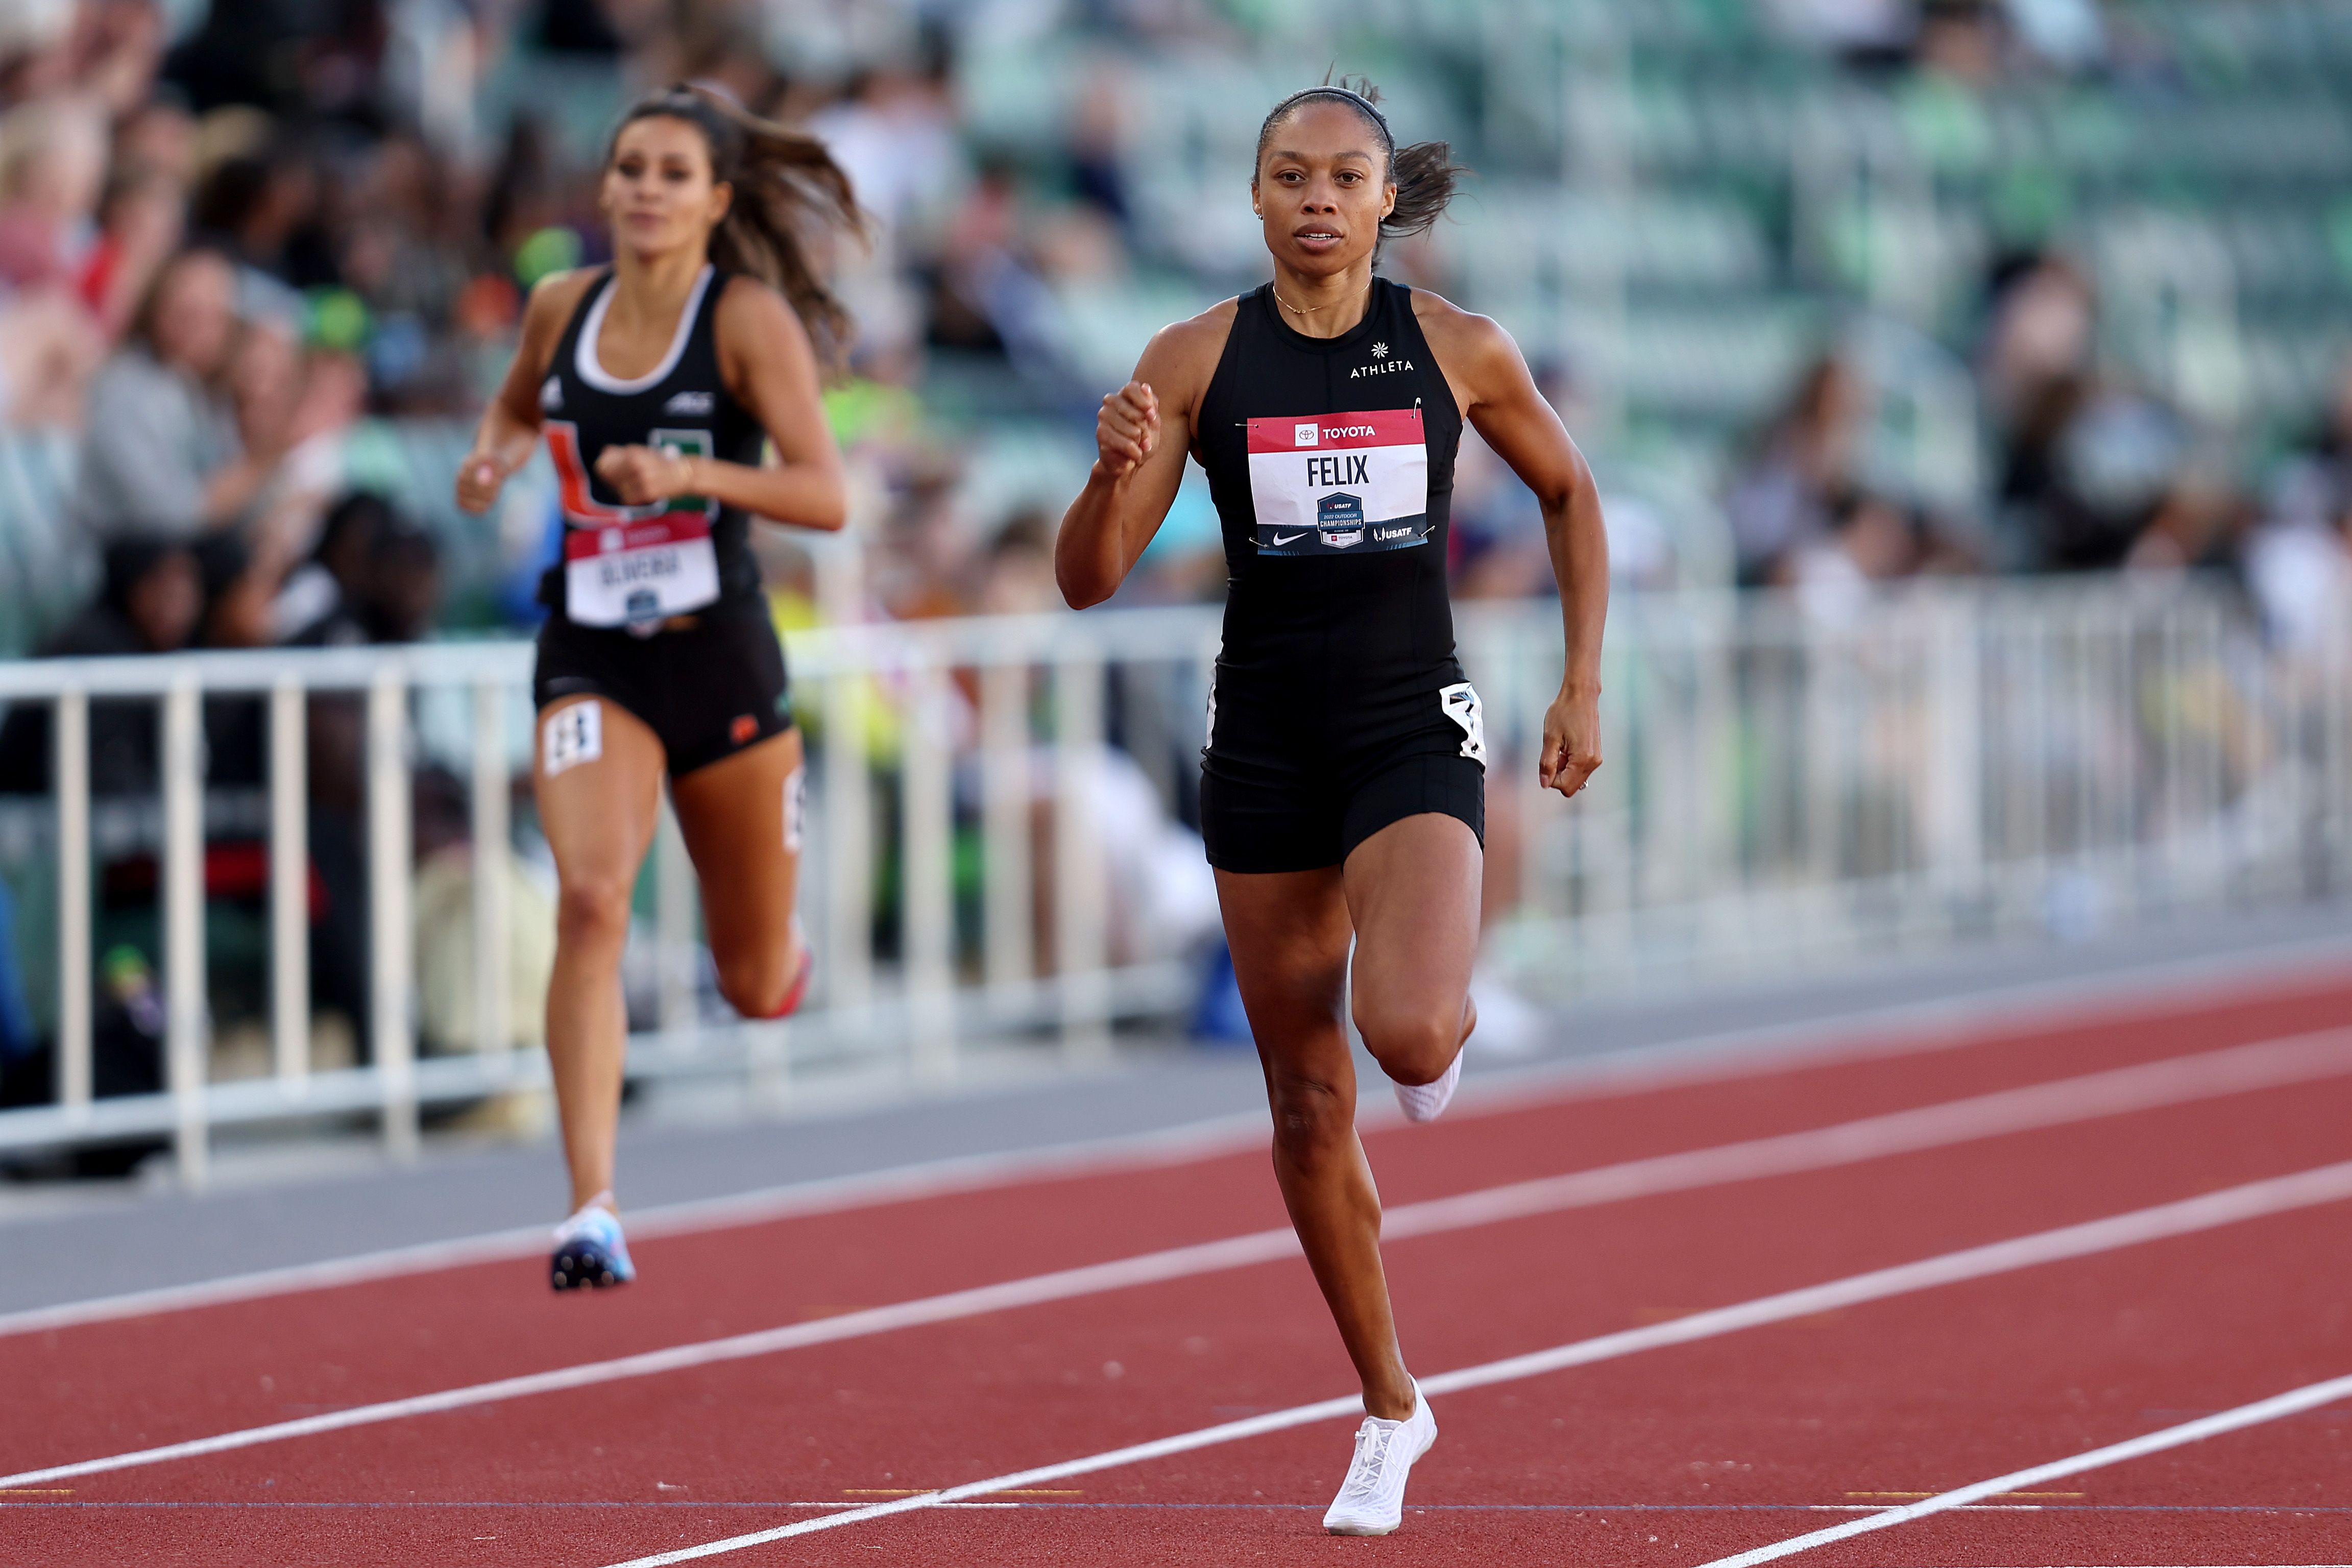 Who to Watch at the 2022 U.S. Track and Field Outdoor Championships